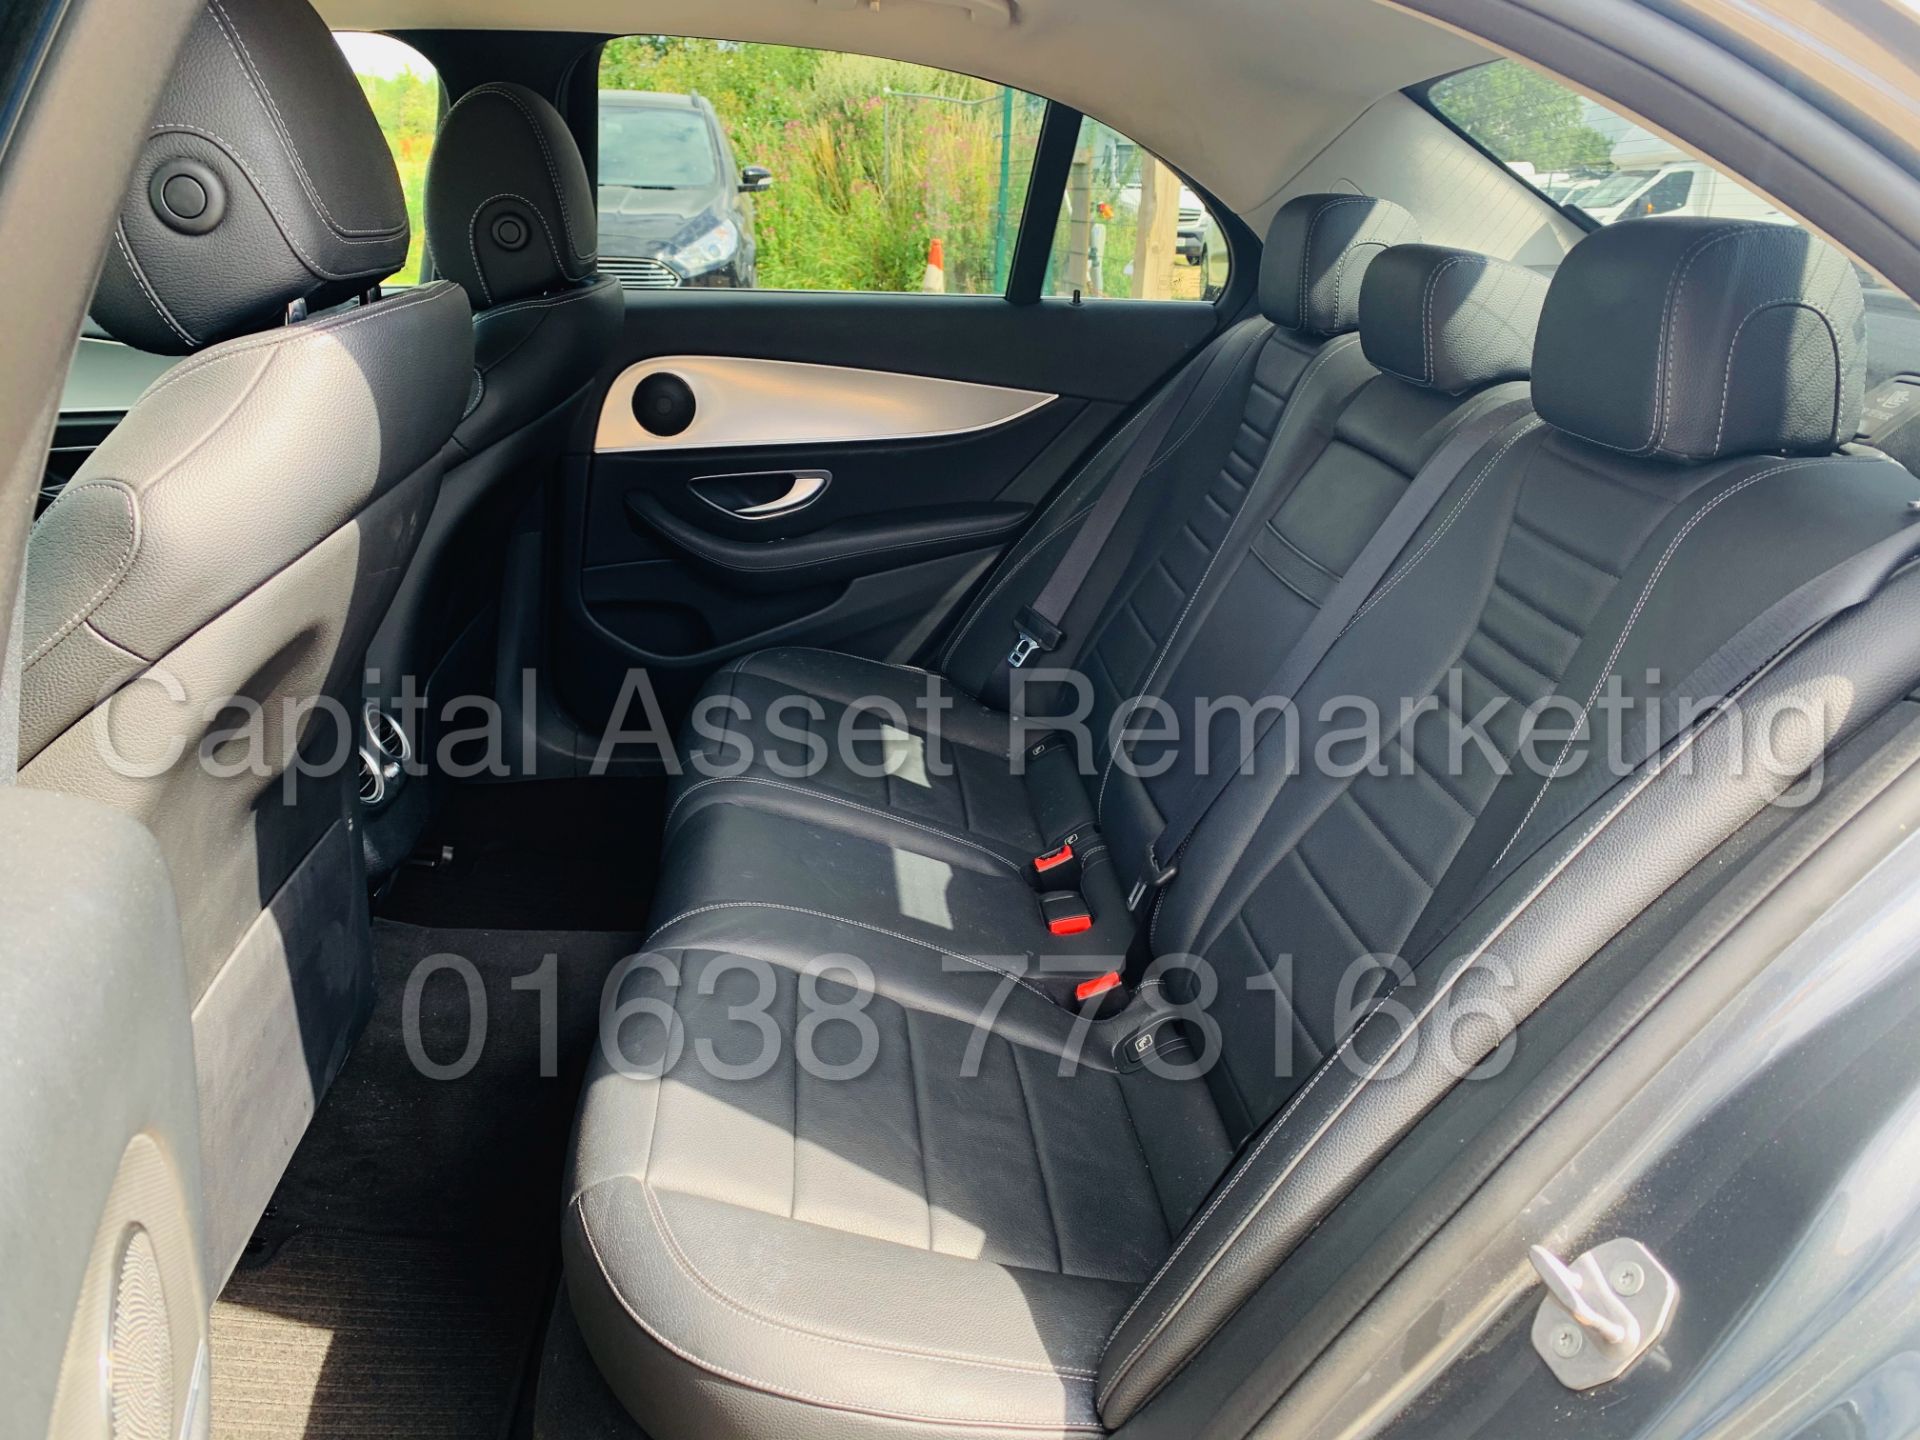 (On Sale) MERCEDES-BENZ E220D *SALOON* (2018 - NEW MODEL) '9-G TRONIC AUTO - LEATHER - SAT NAV' - Image 28 of 56